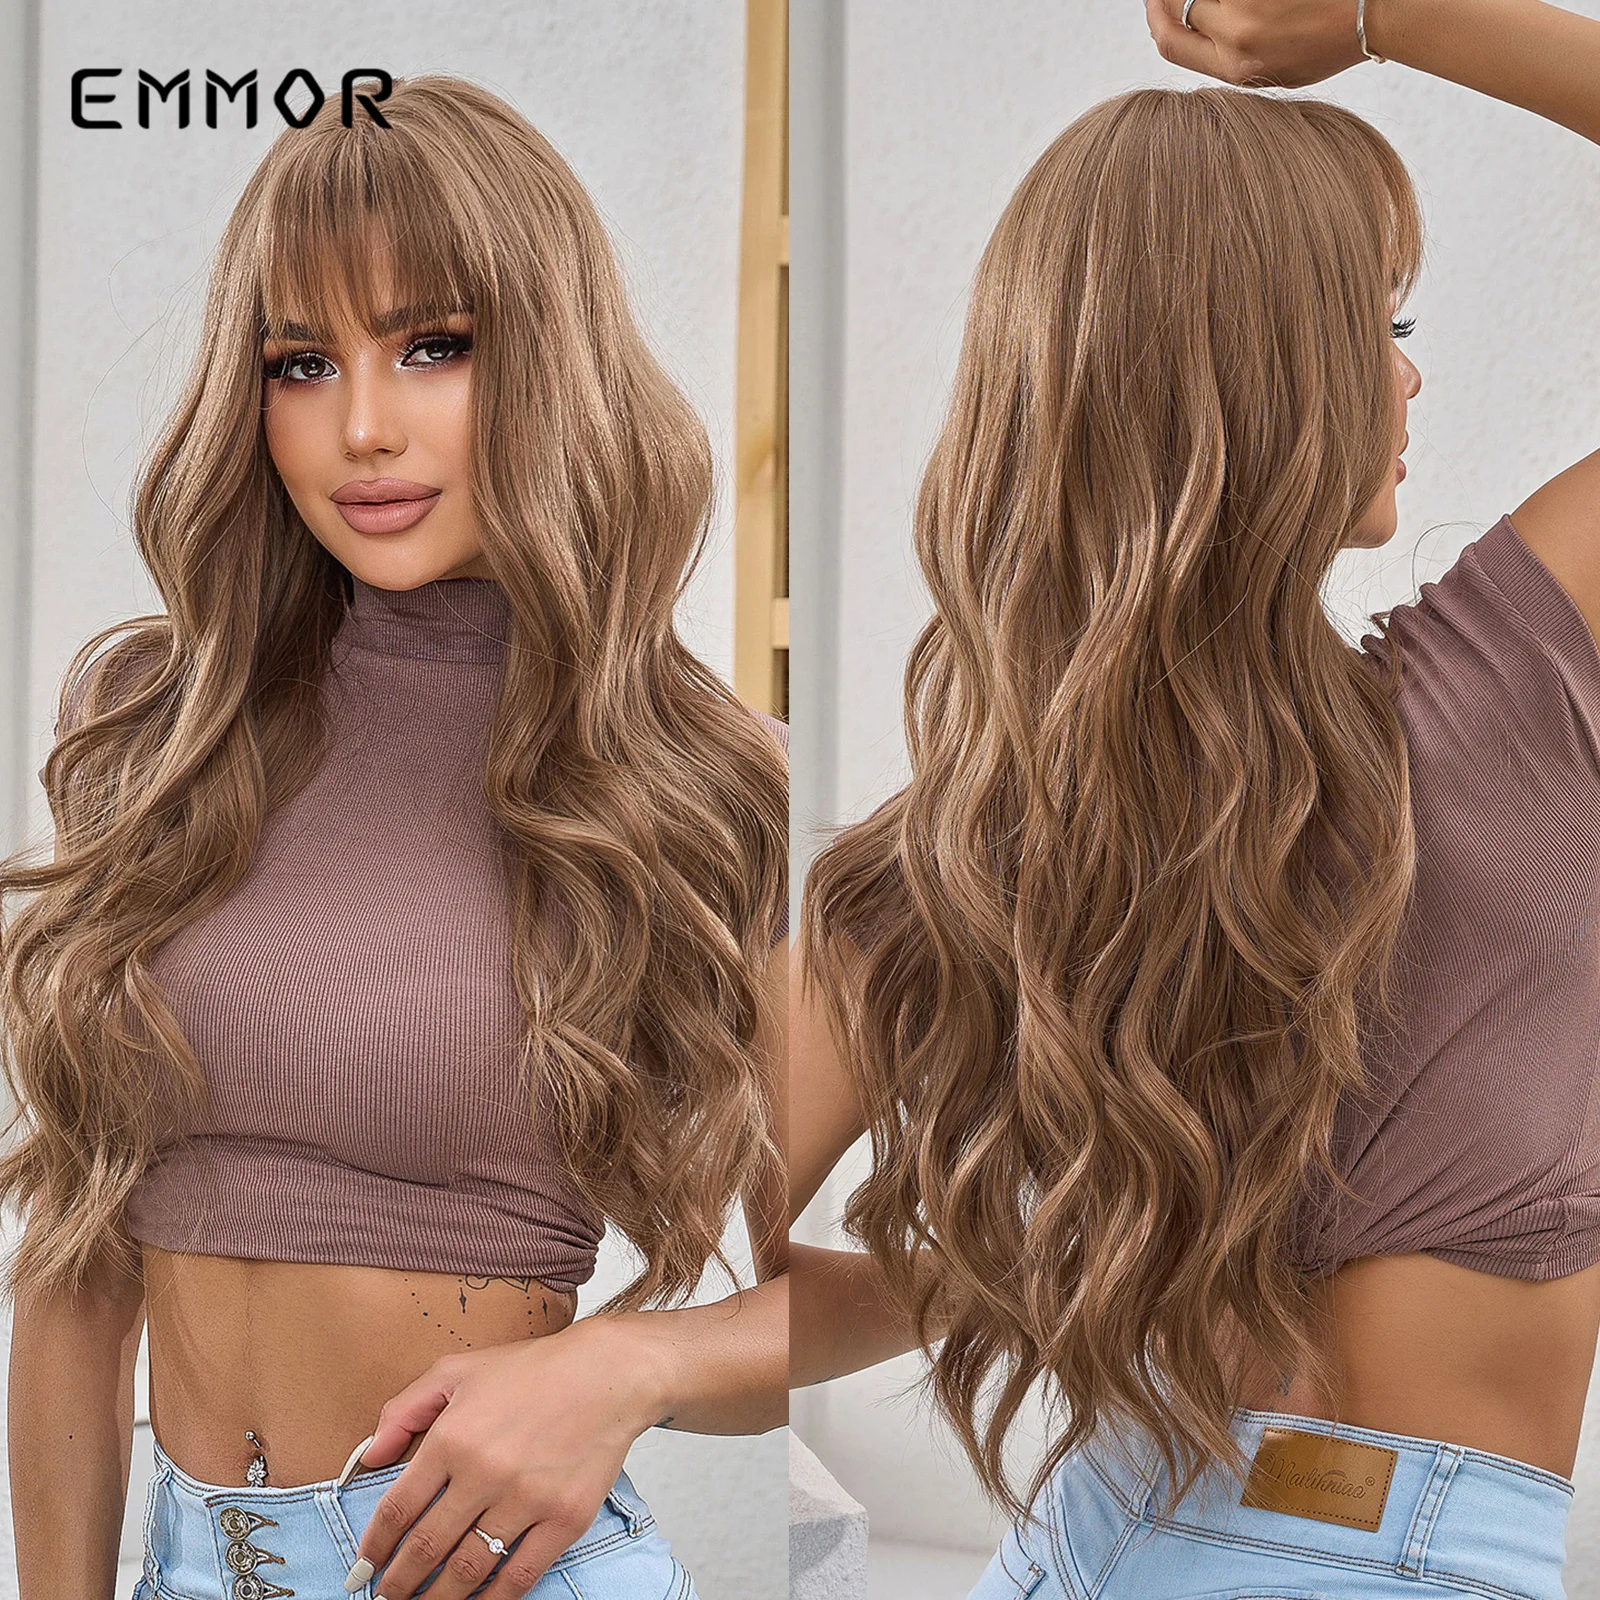 

Emmor Synthetic Long Light Brown Wavy Wigs with Bang Cosplay Curly Hair for Christmas Natural Heat Resistant Fiber Wig for Women